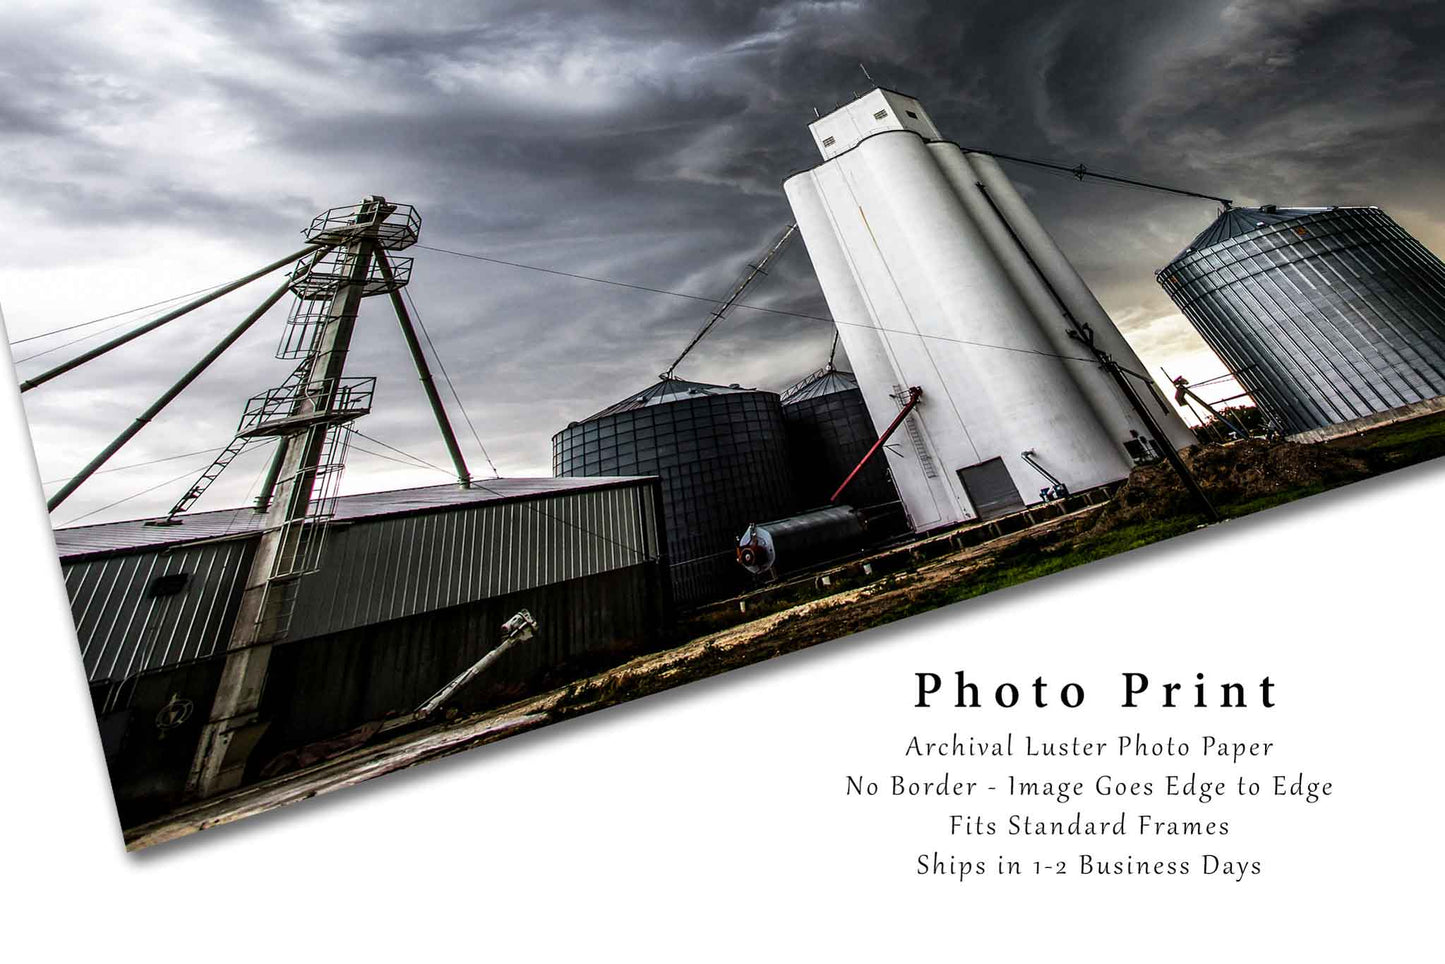 Rural Photography Print - Fine Art Picture of Storm Clouds Over Grain Elevator in Small Town Kansas Farming Home Decor 4x6 to 30x45